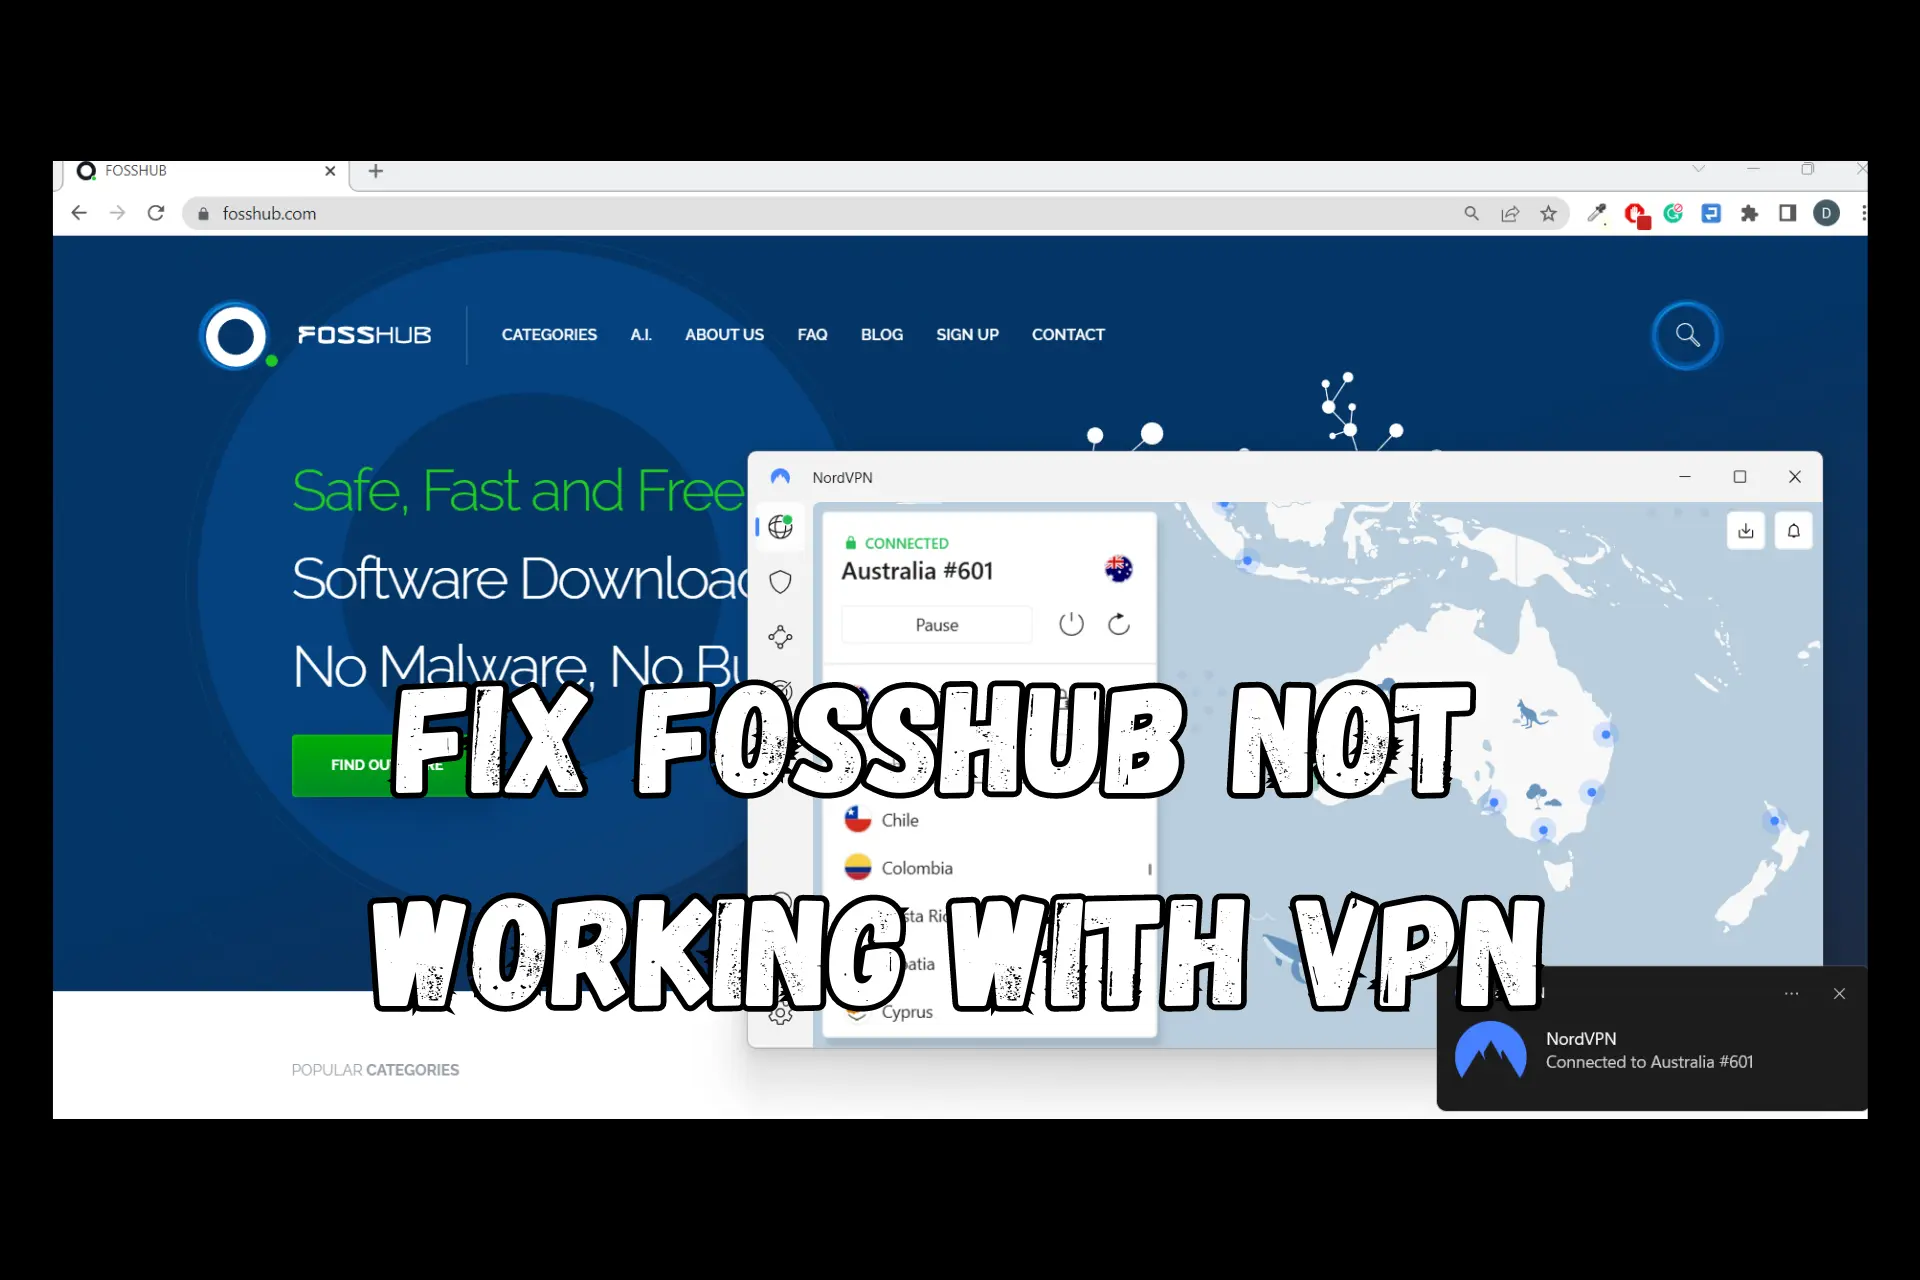 fosshub not working with vpn